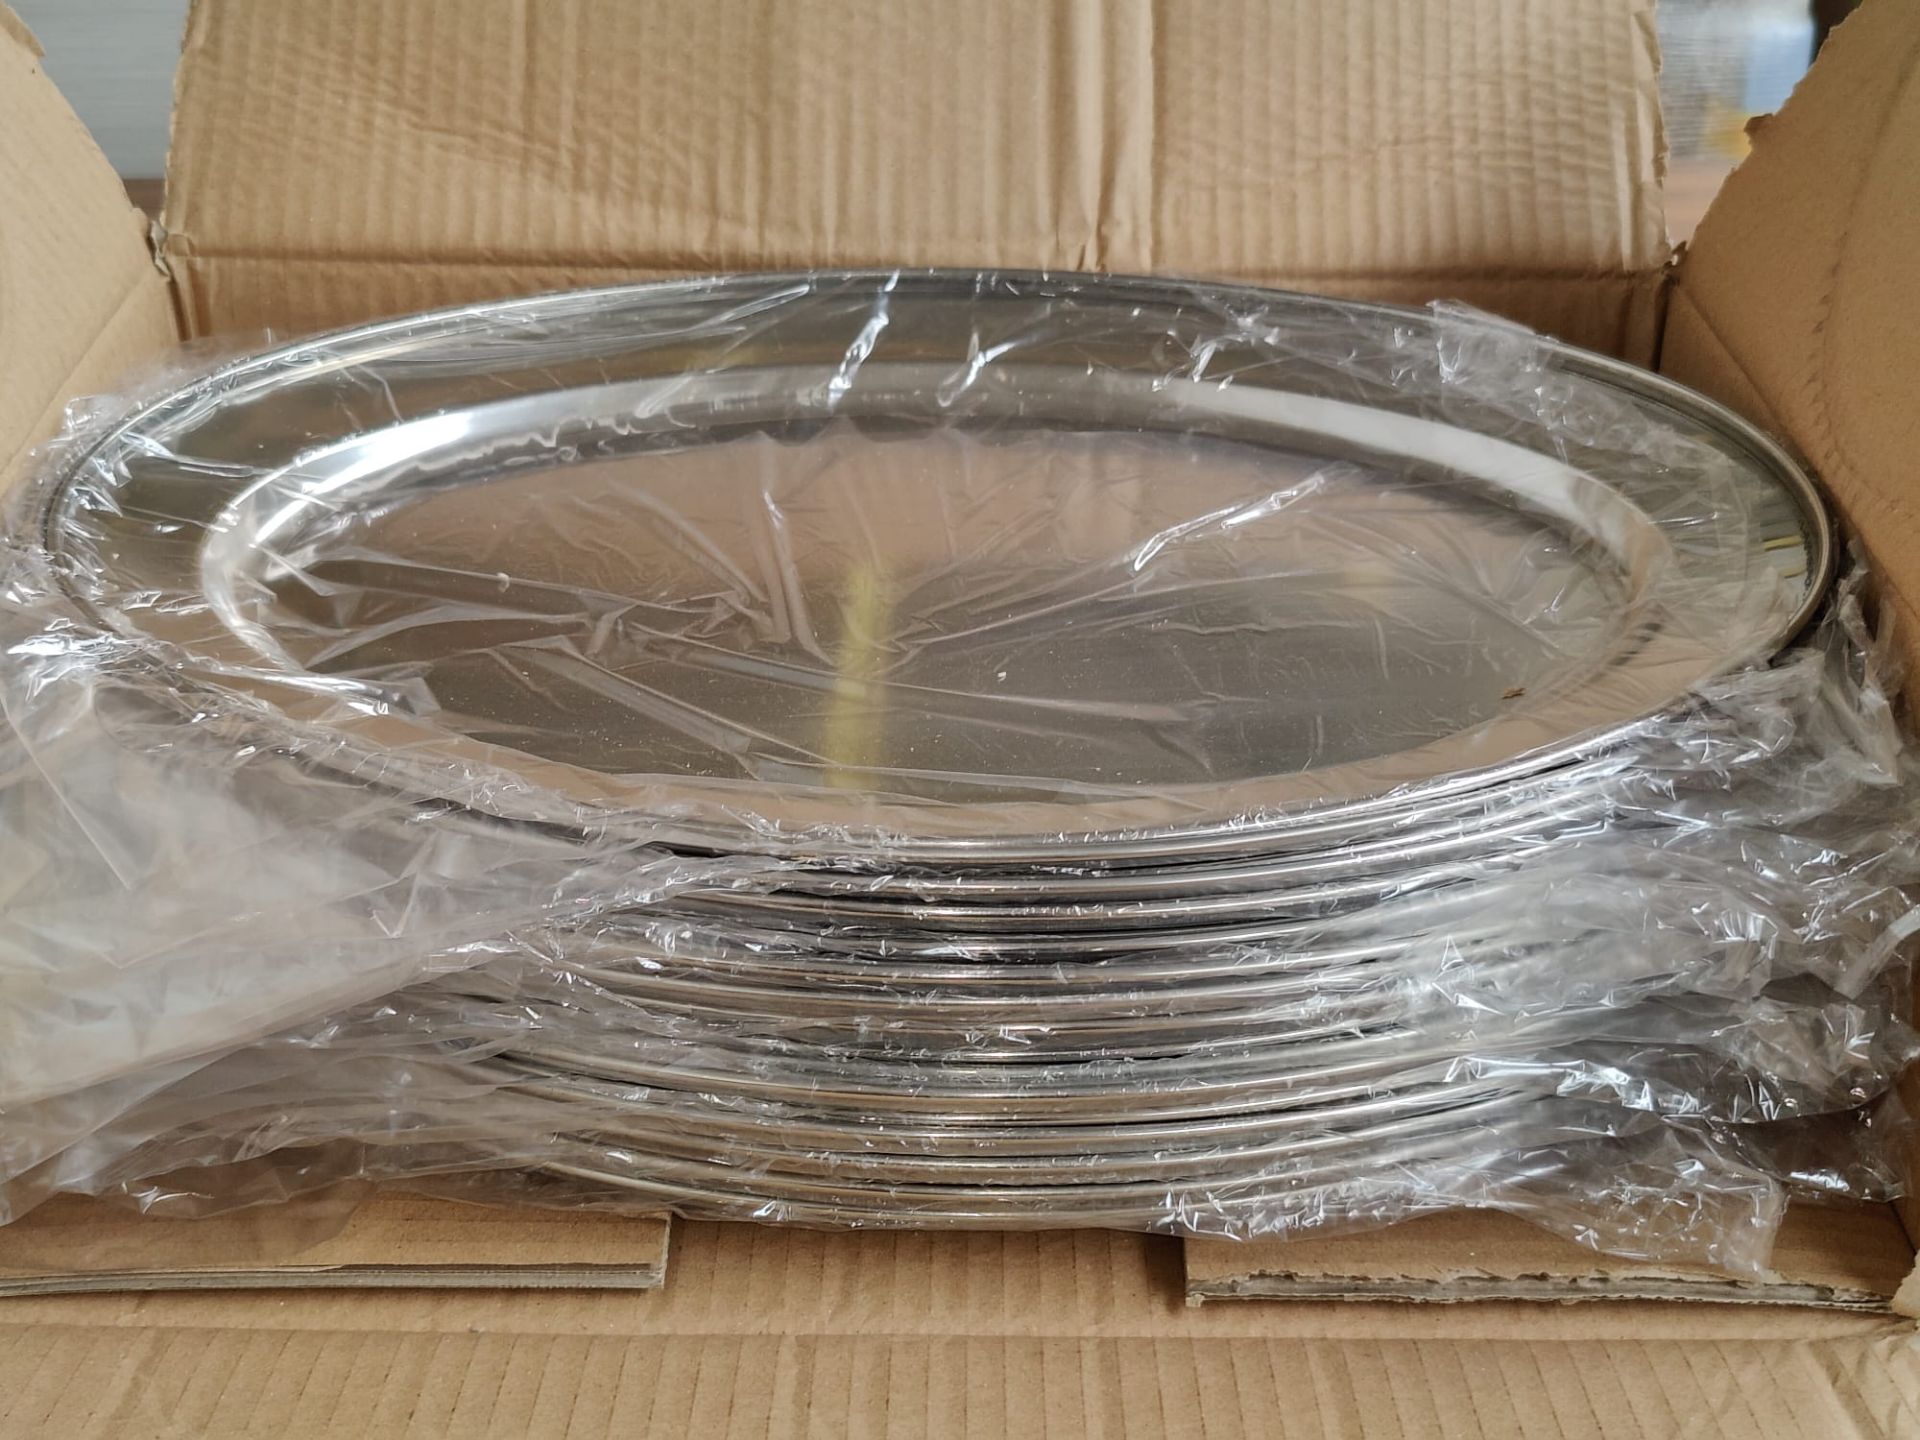 20 x Stainless Steel Oval Service Trays - Size: 450mm x 310mm - Brand New Boxed Stock - RRP £200 - Image 4 of 8